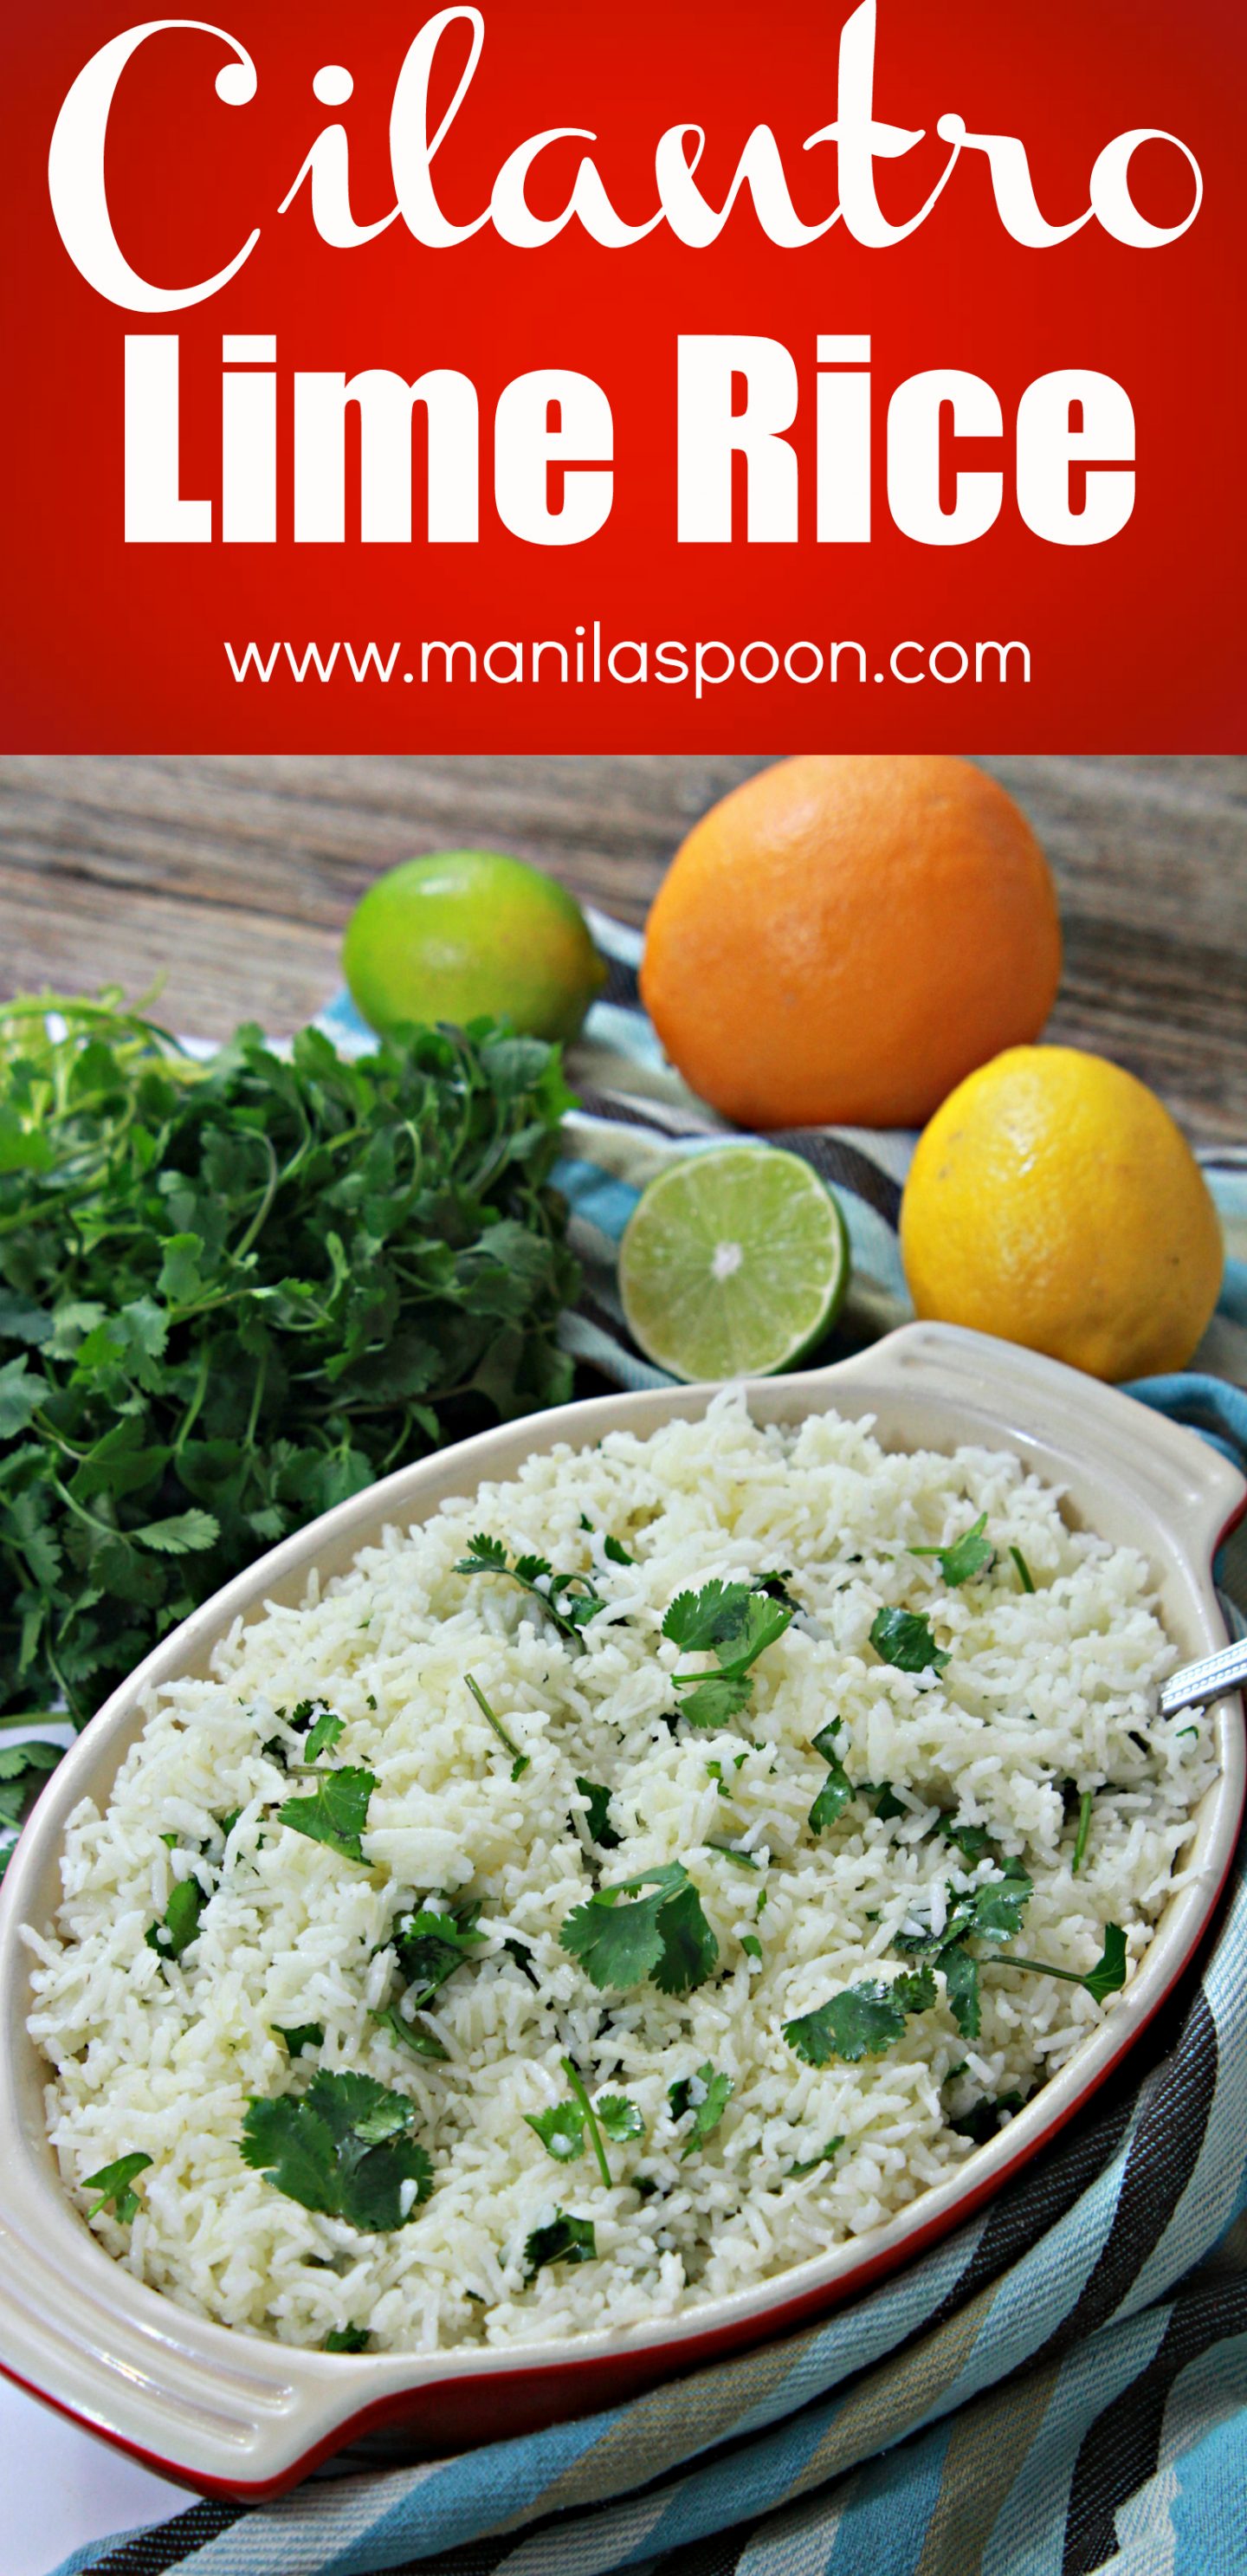 A combination of citrus juices make this Cilantro Lime Rice so tasty without being too tangy - so perfectly balanced. Everyone loves this and it's one of my oft-requested recipes! Easy to make, too!! #cilantro #lime #rice #cilantrolimerice